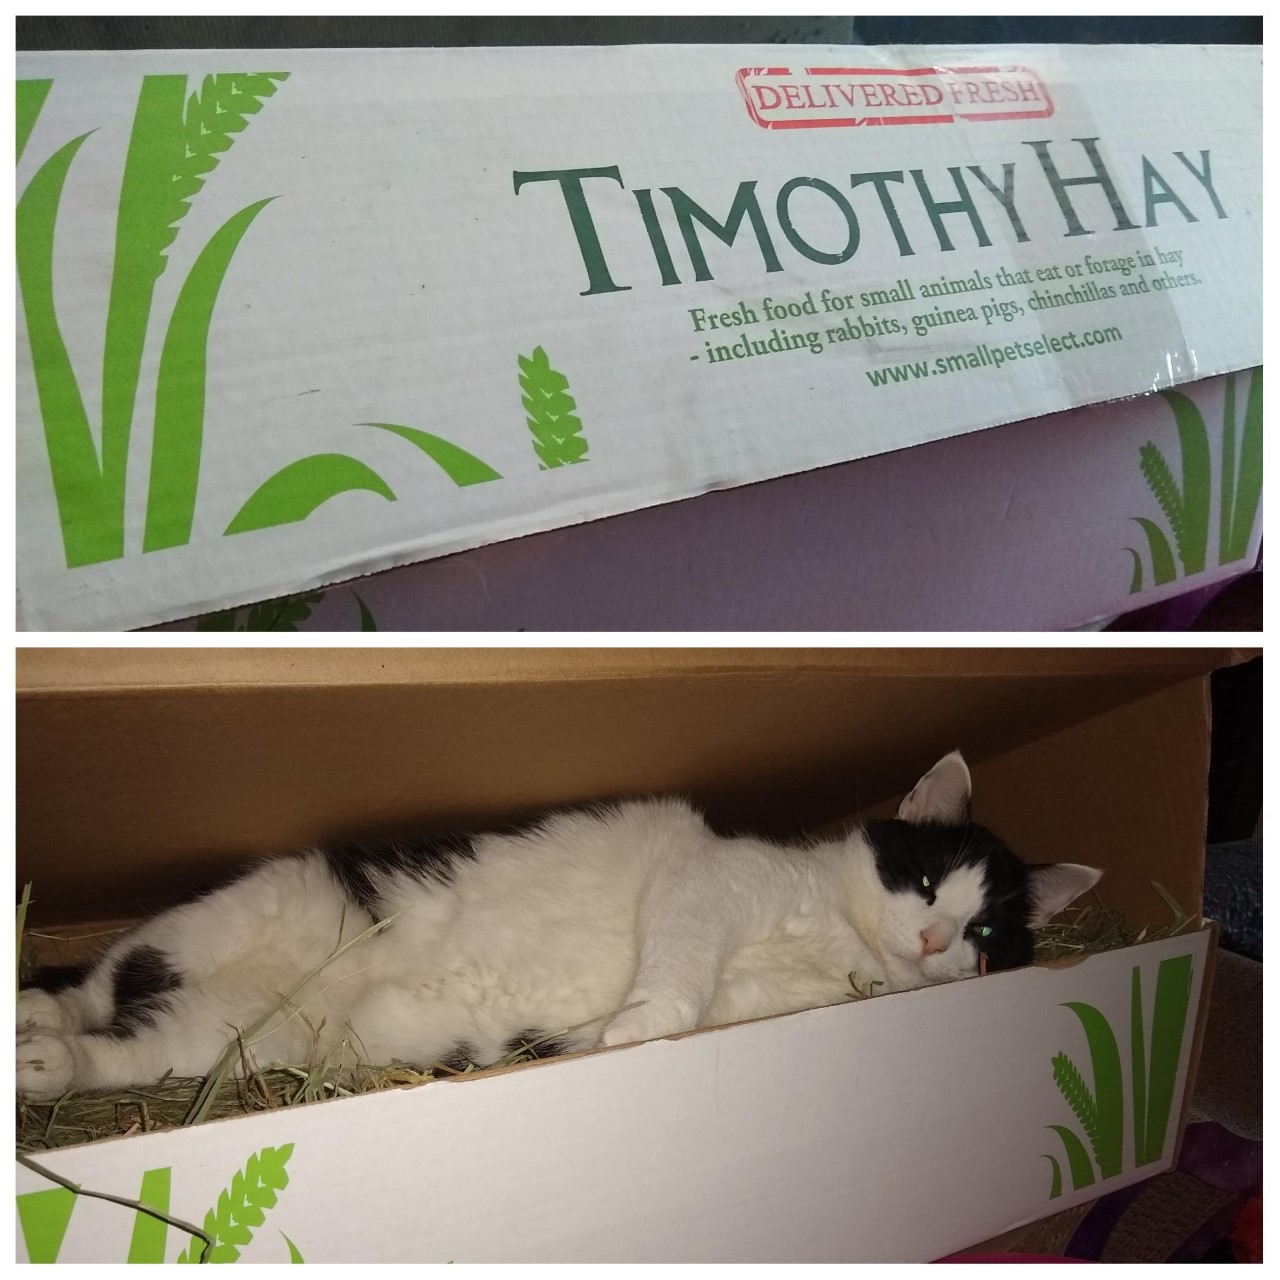 Napping in the Hay Box